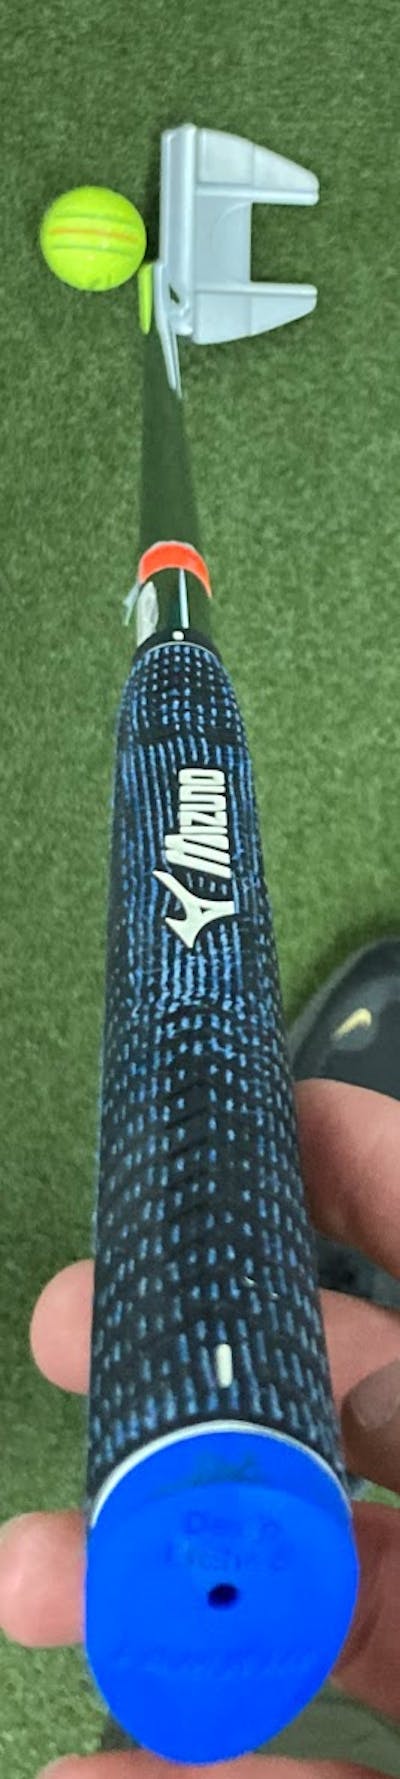 Top down view of the Mizuno M.Craft Type VI Putter.